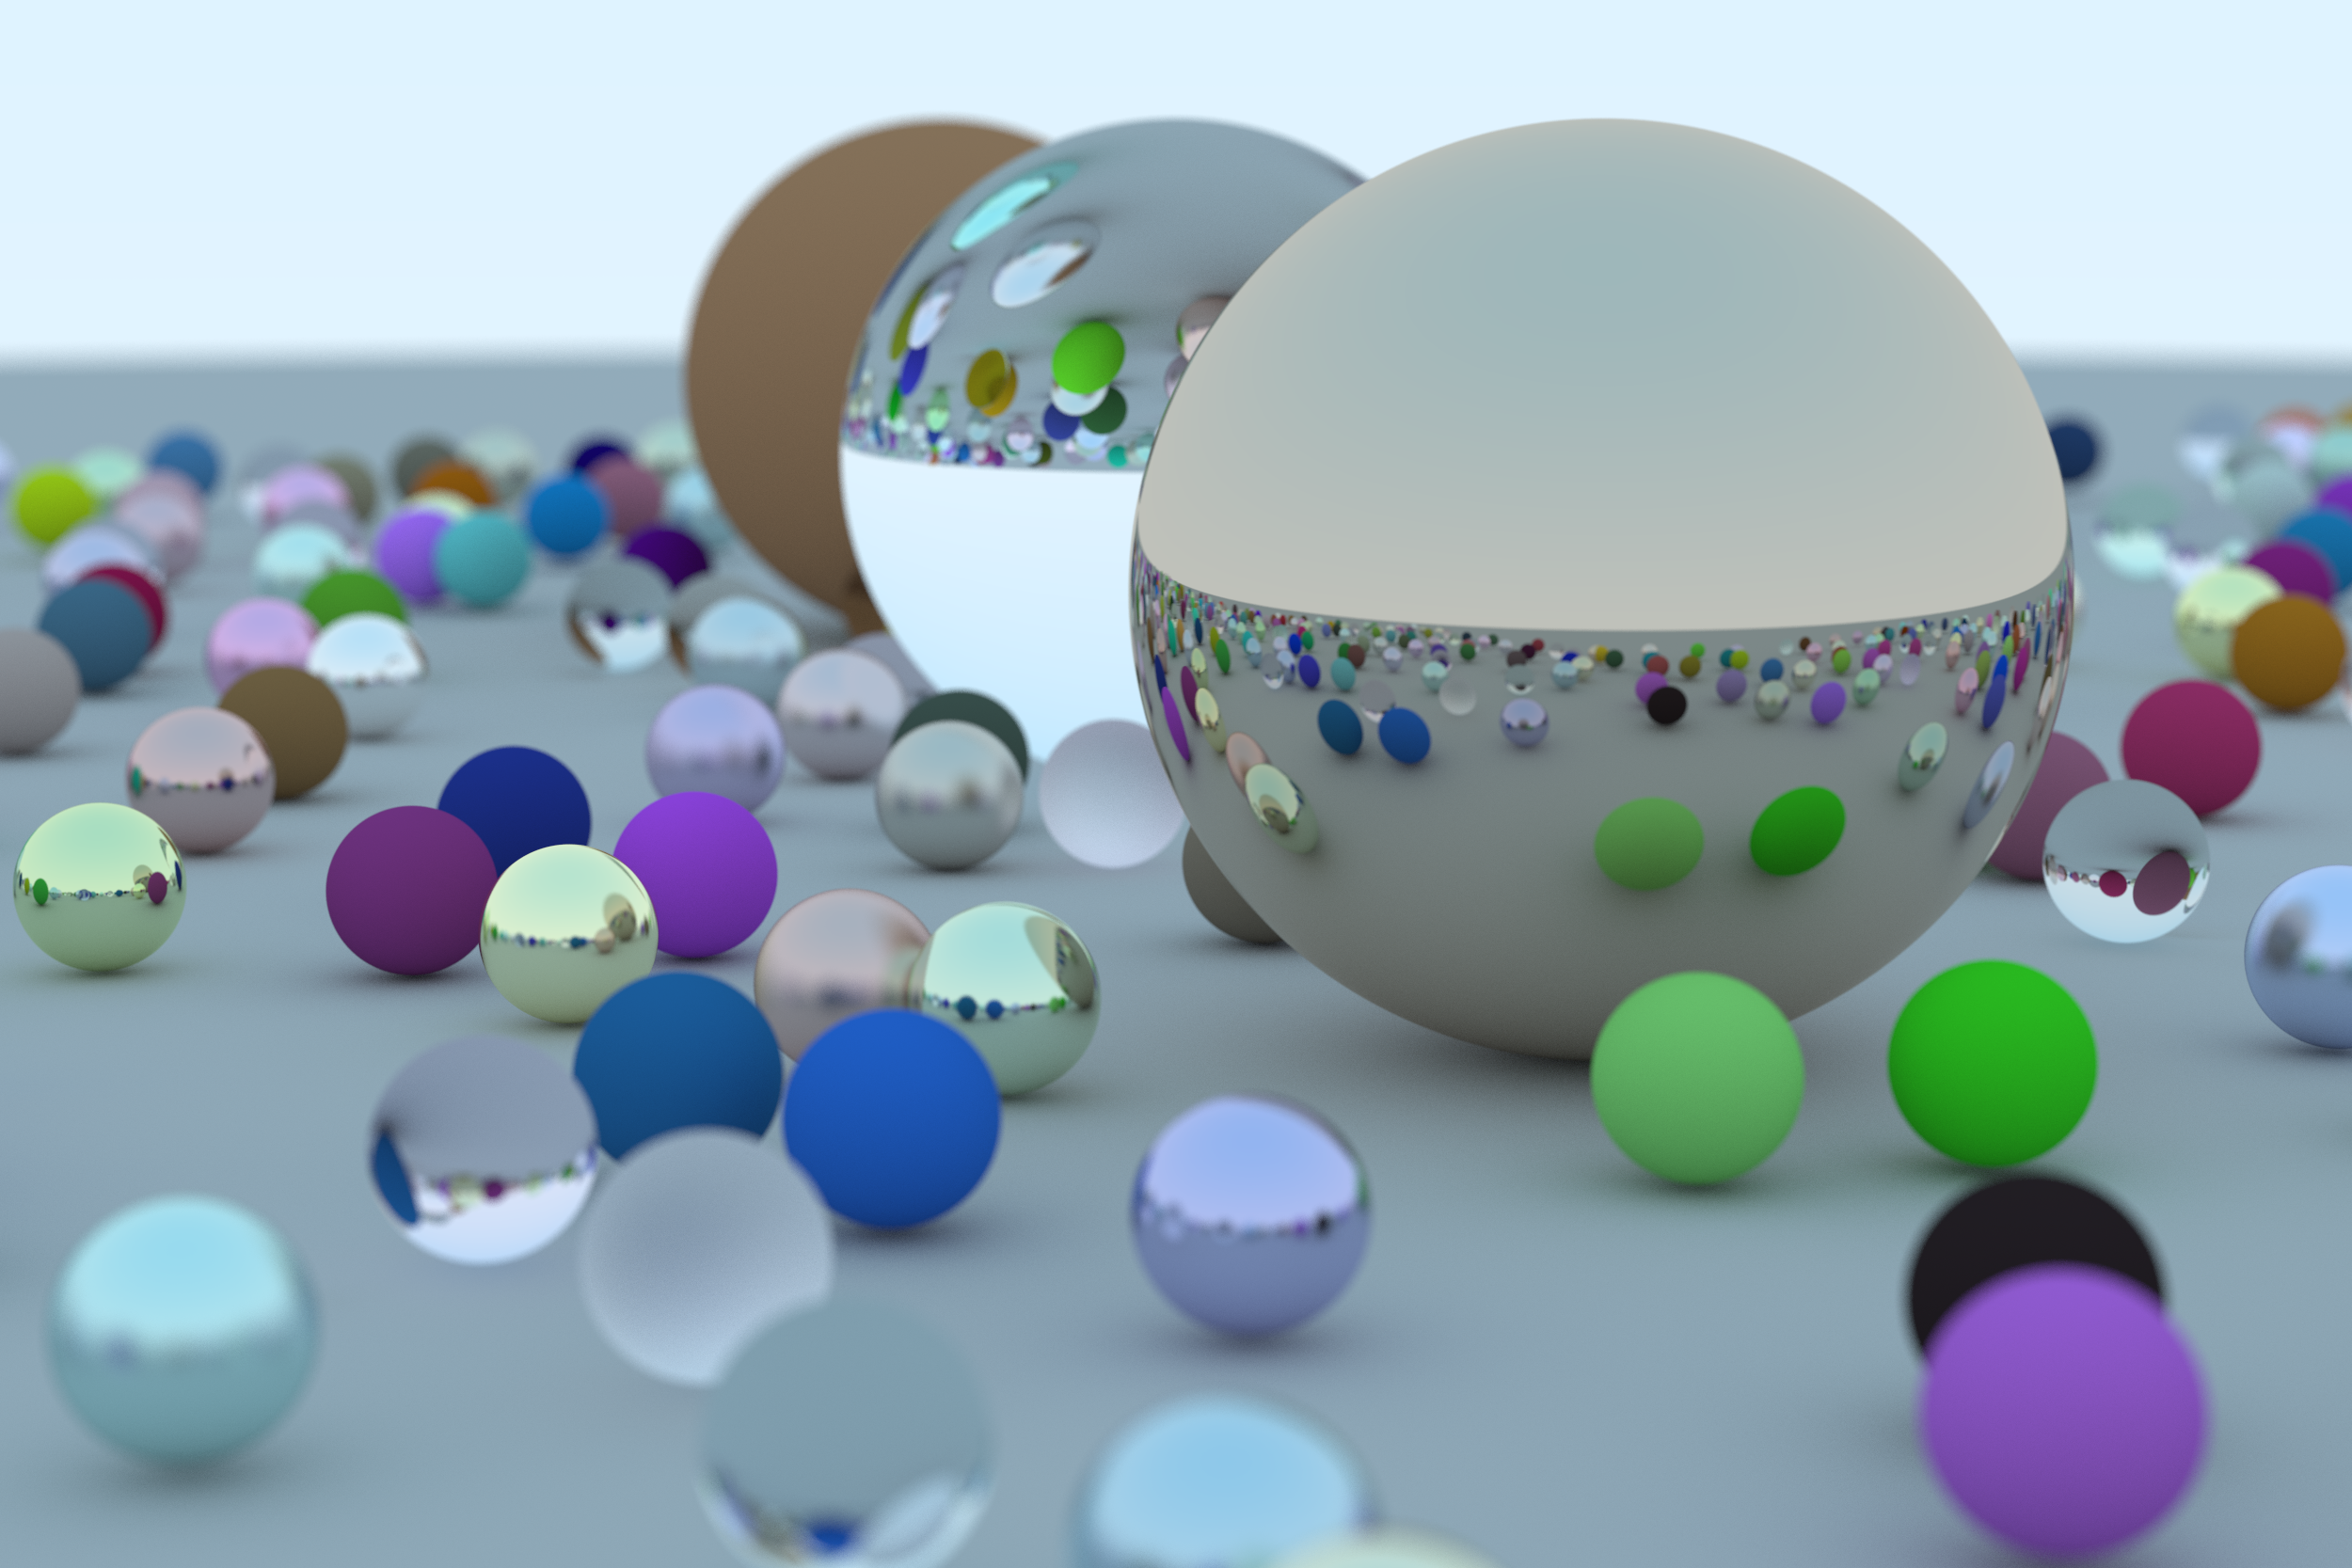 Ray Tracing in One Weekend 学习笔记（2）：相机类的实现